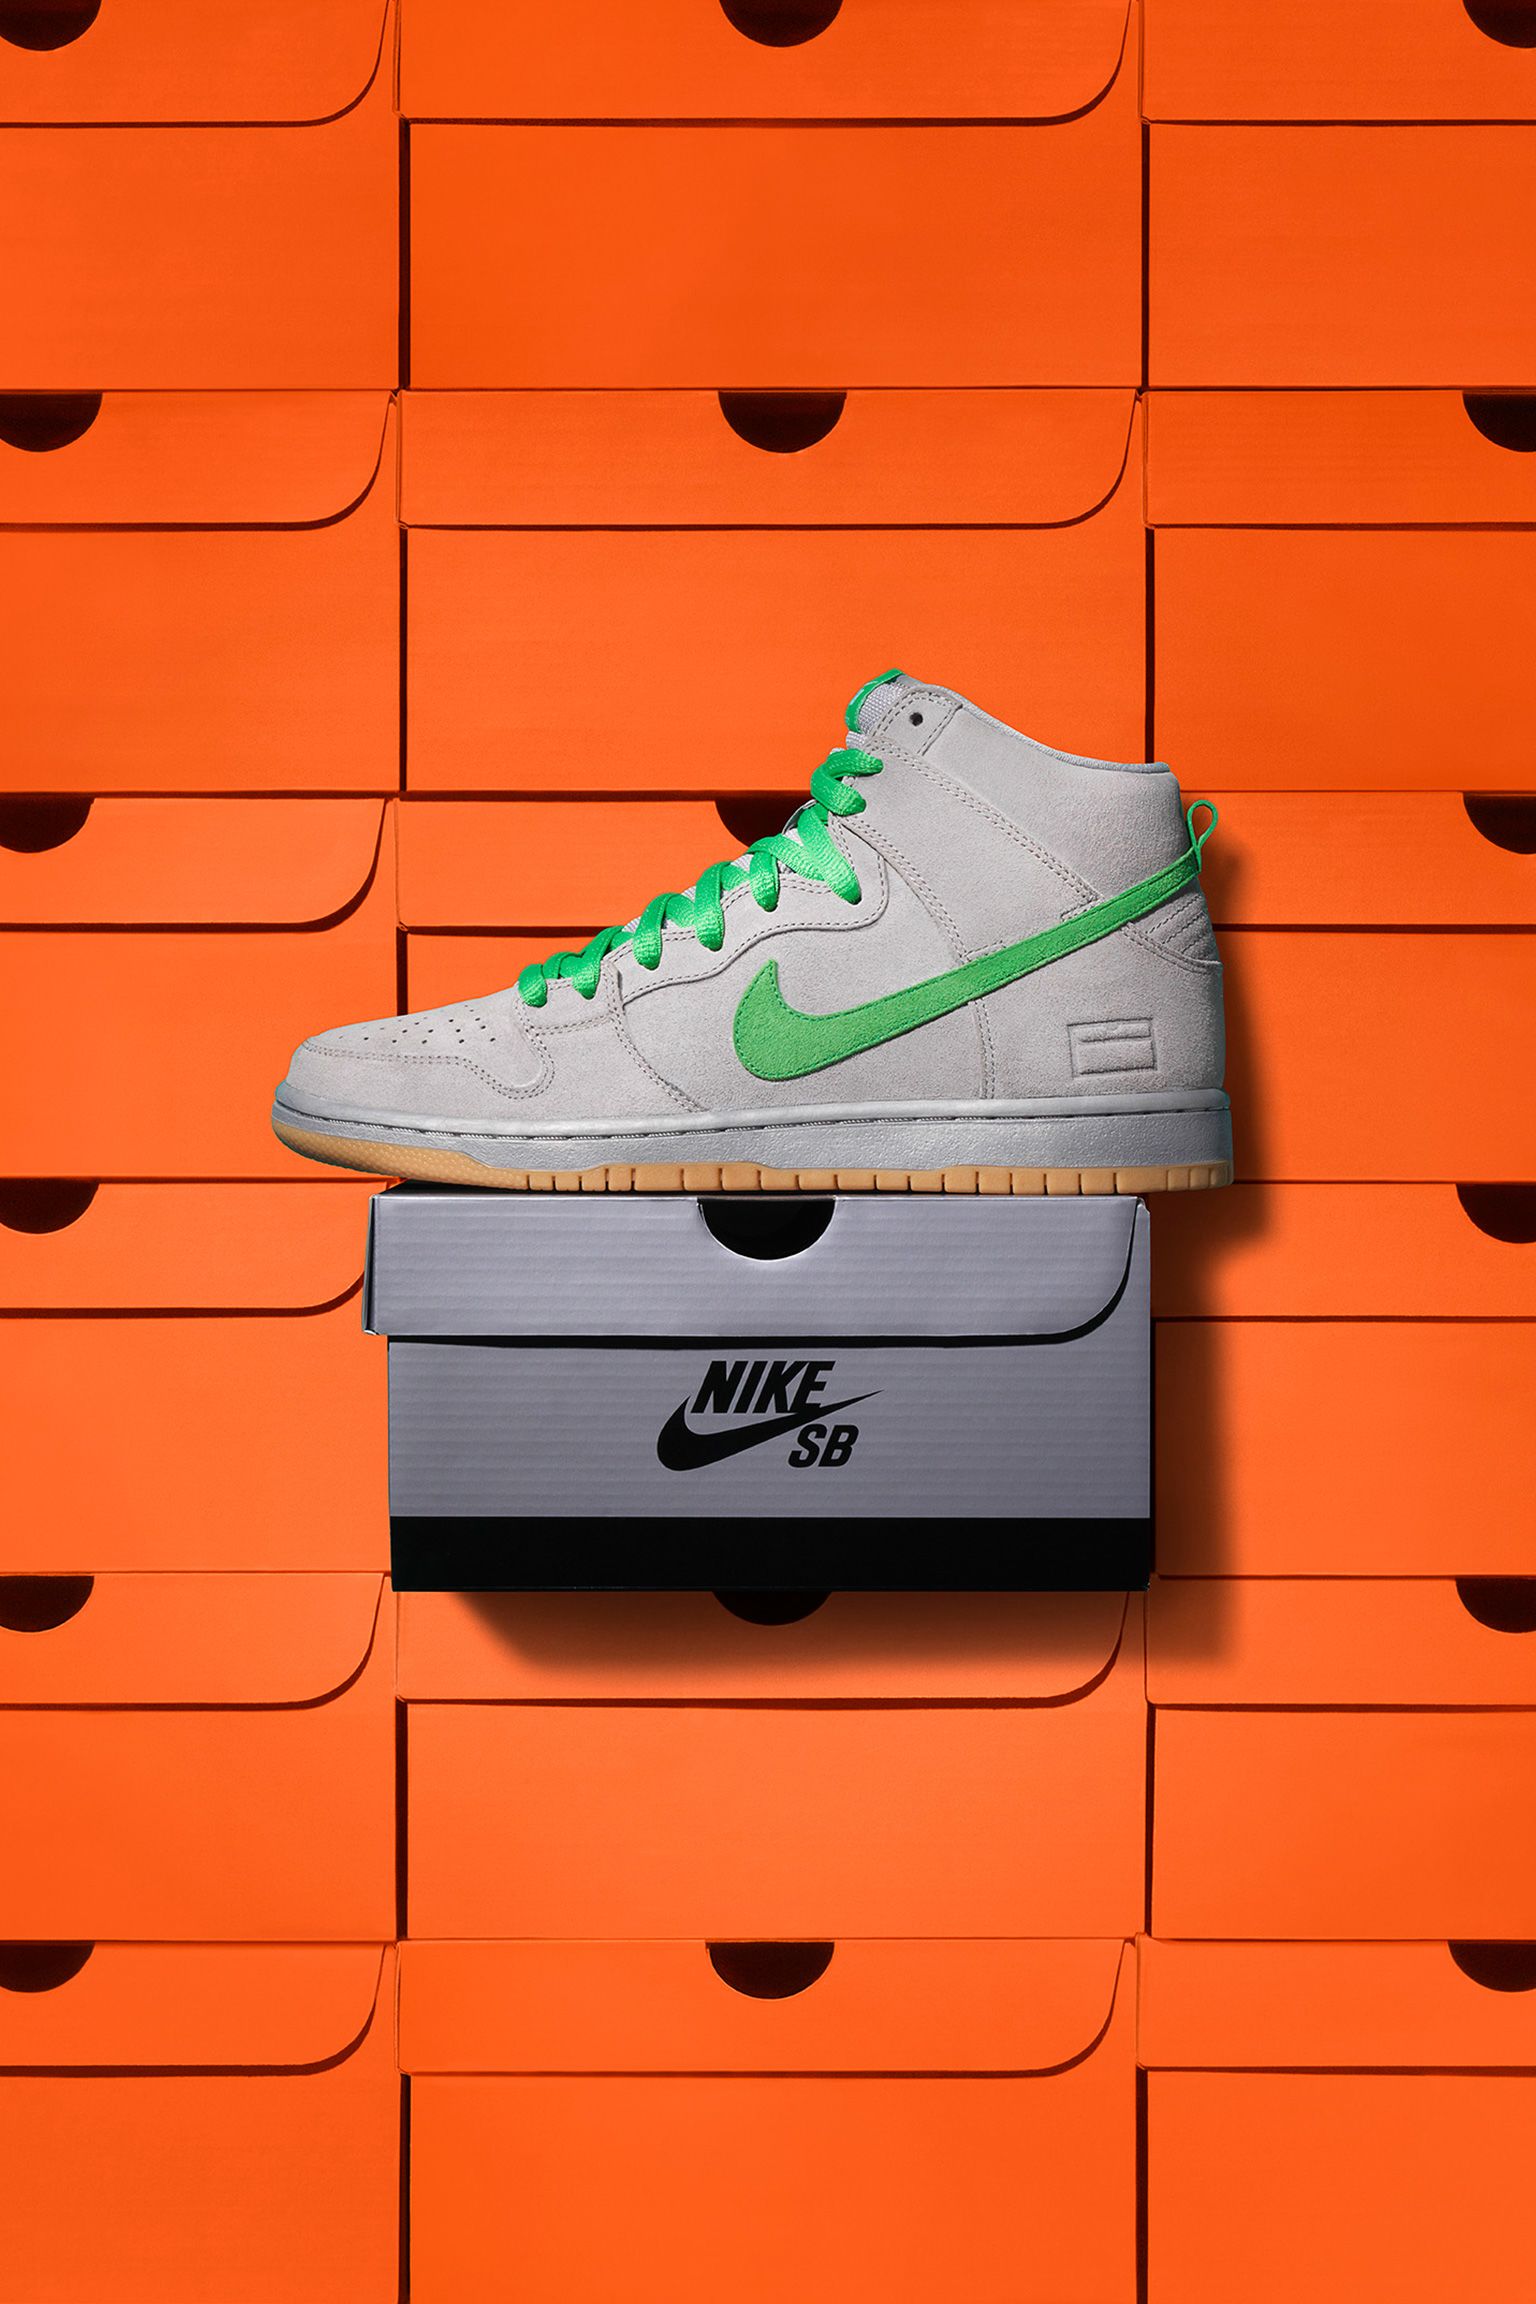 nike sb shoe boxes for sale